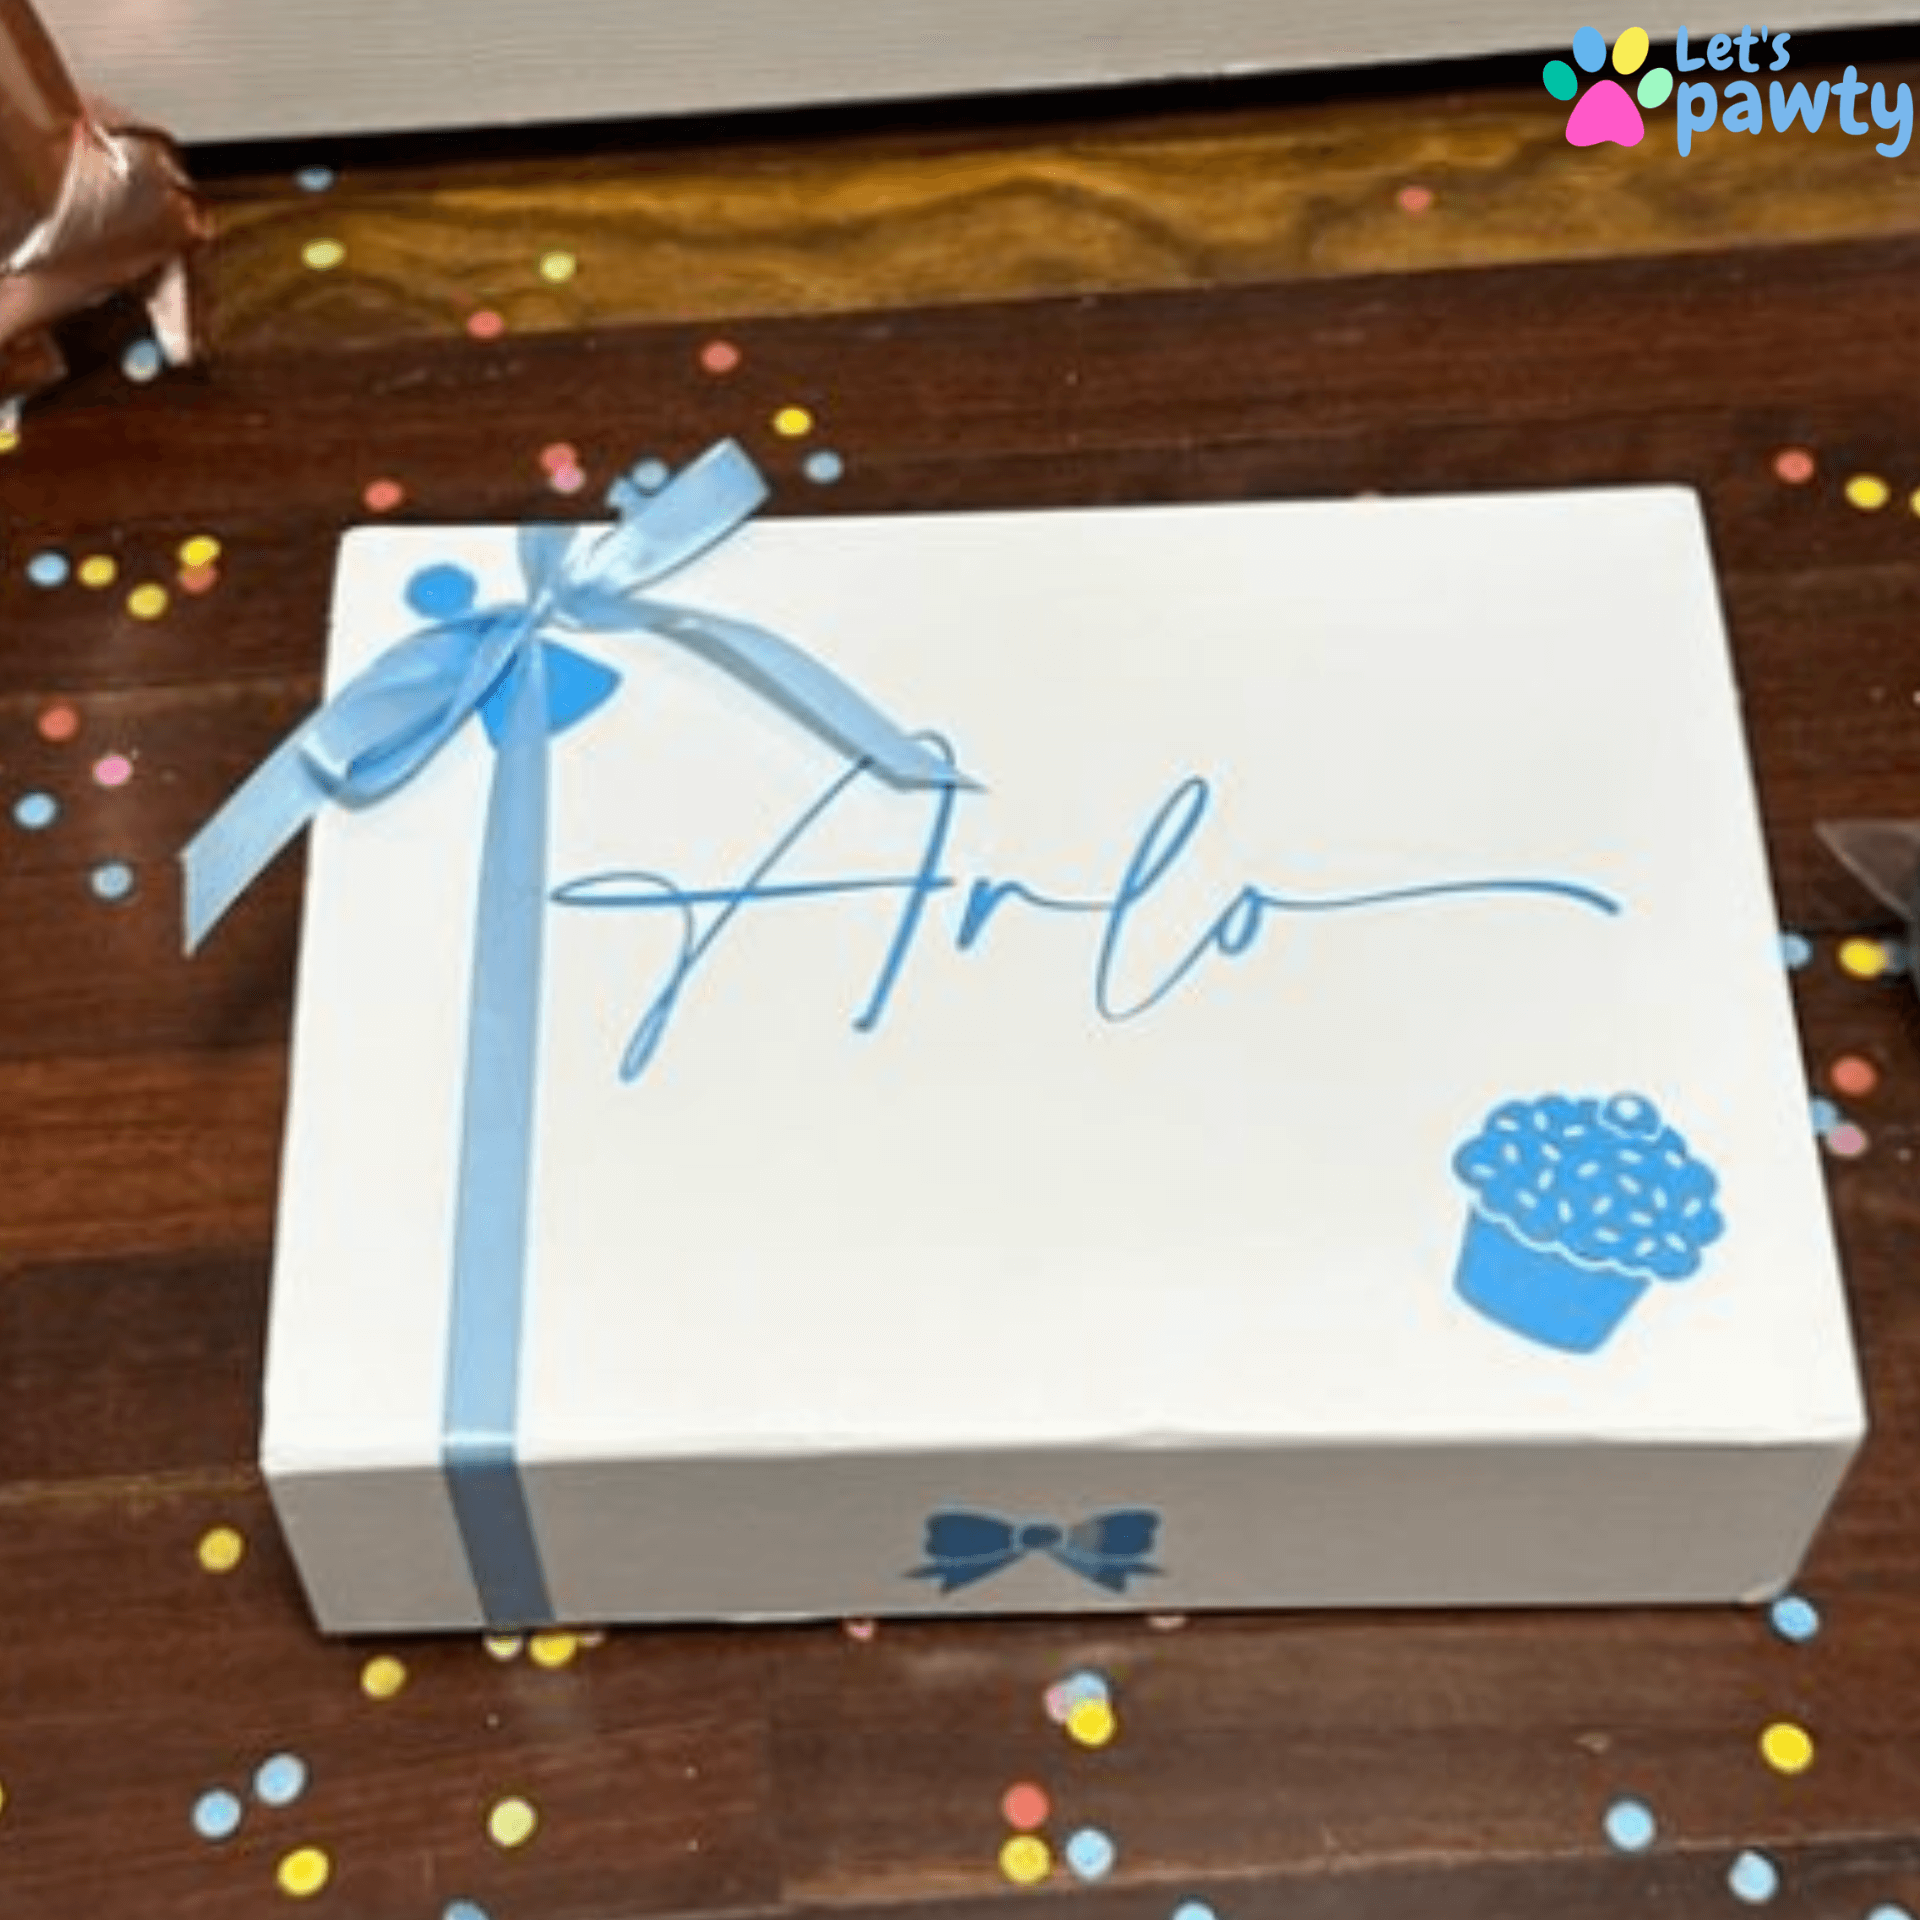 dog birthday party gift boxes Let's Pawty Sydney